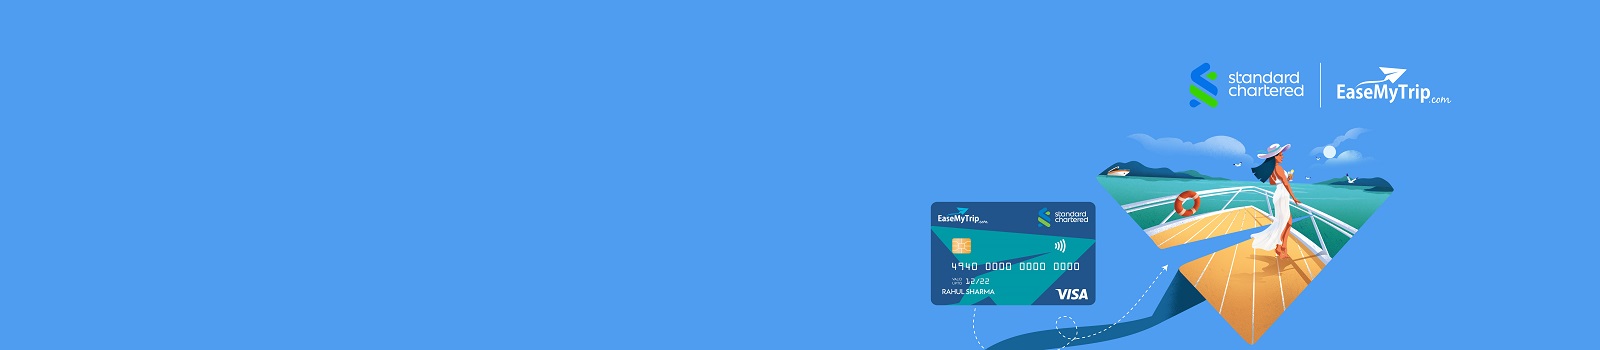 Presenting the Standard Chartered EaseMyTrip Credit Card